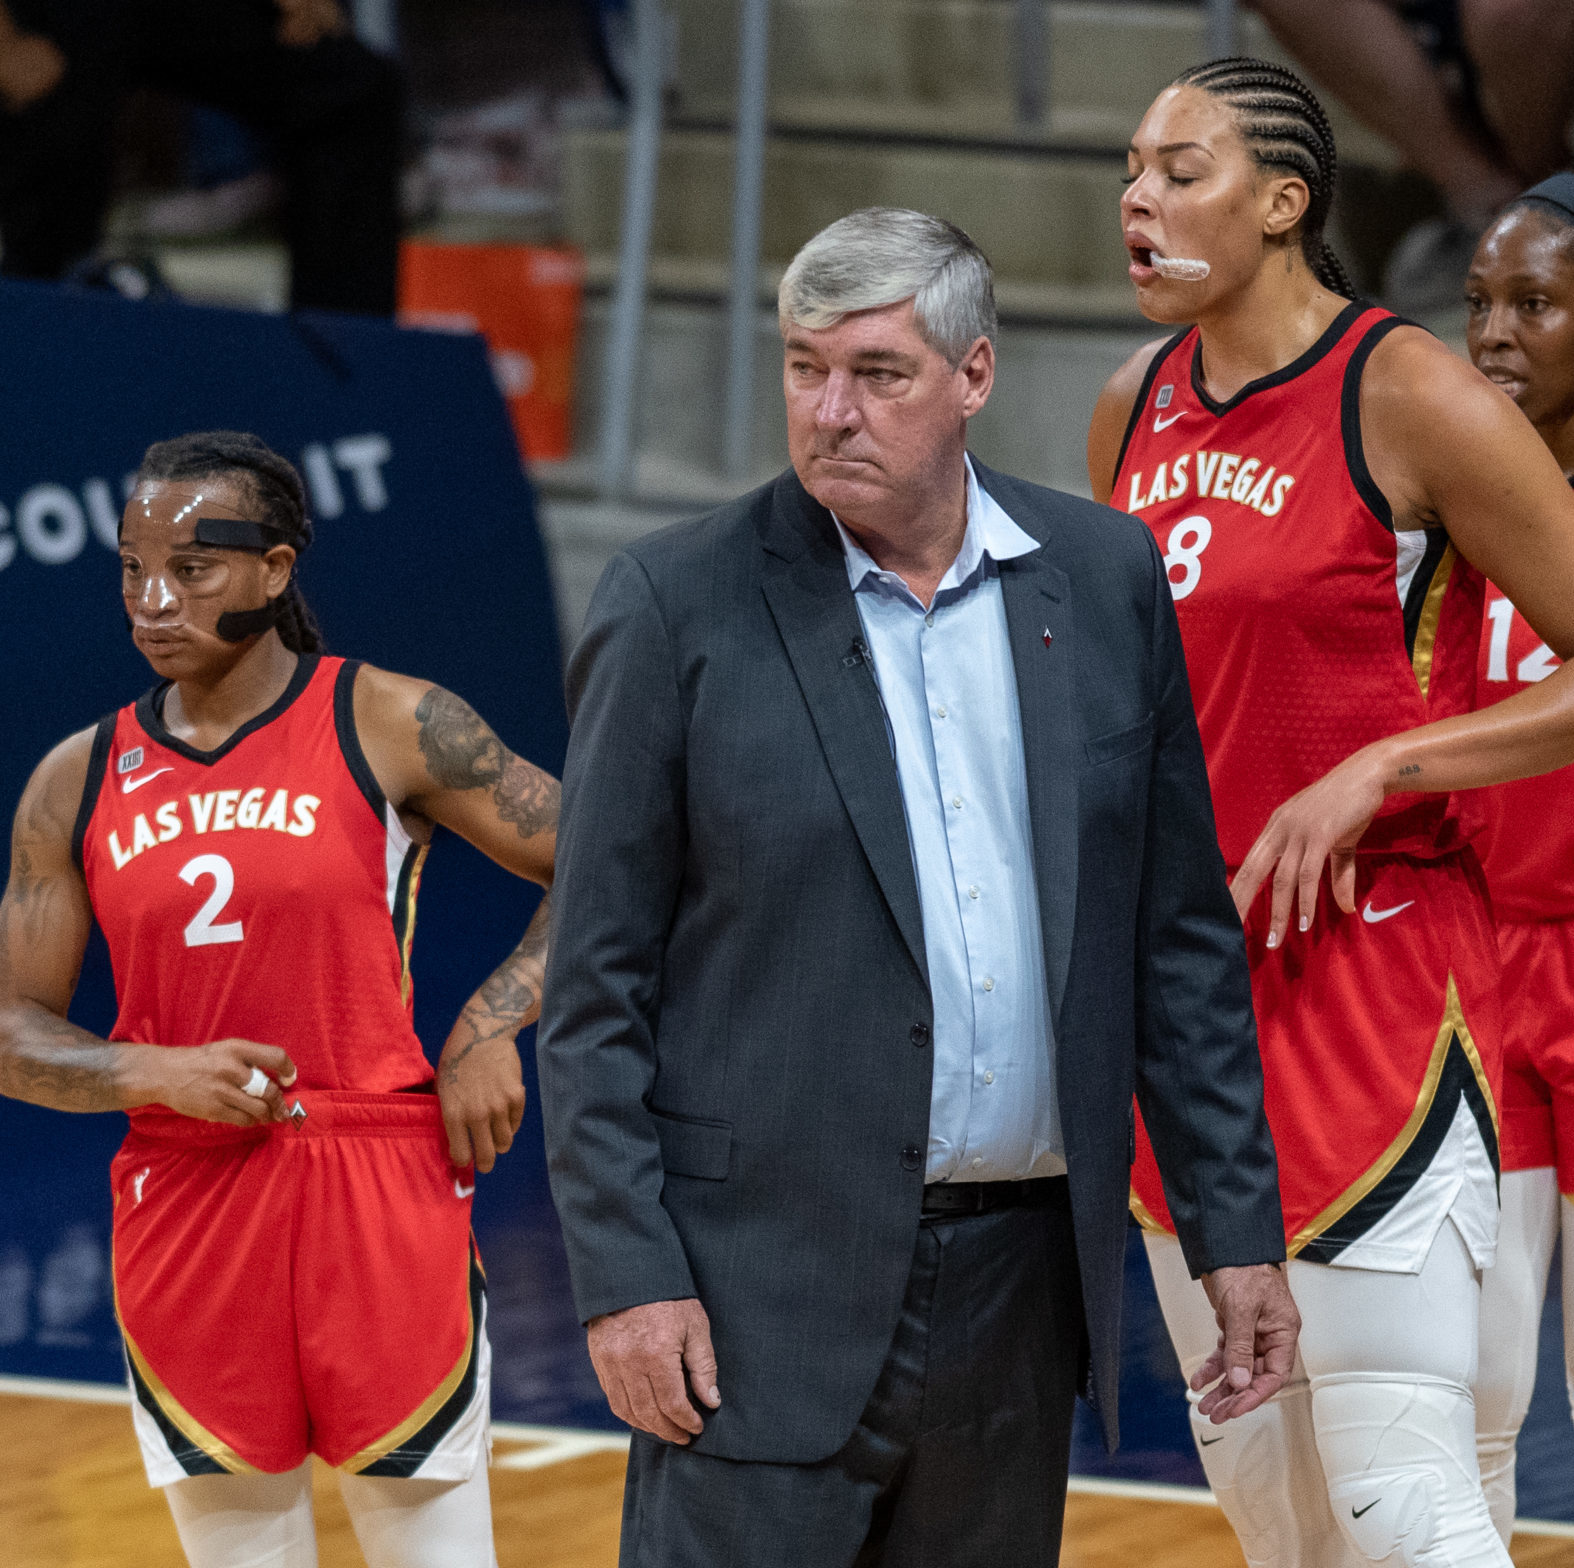 Bill Laimbeer retires as one of the most influential people in WNBA history  - The Next